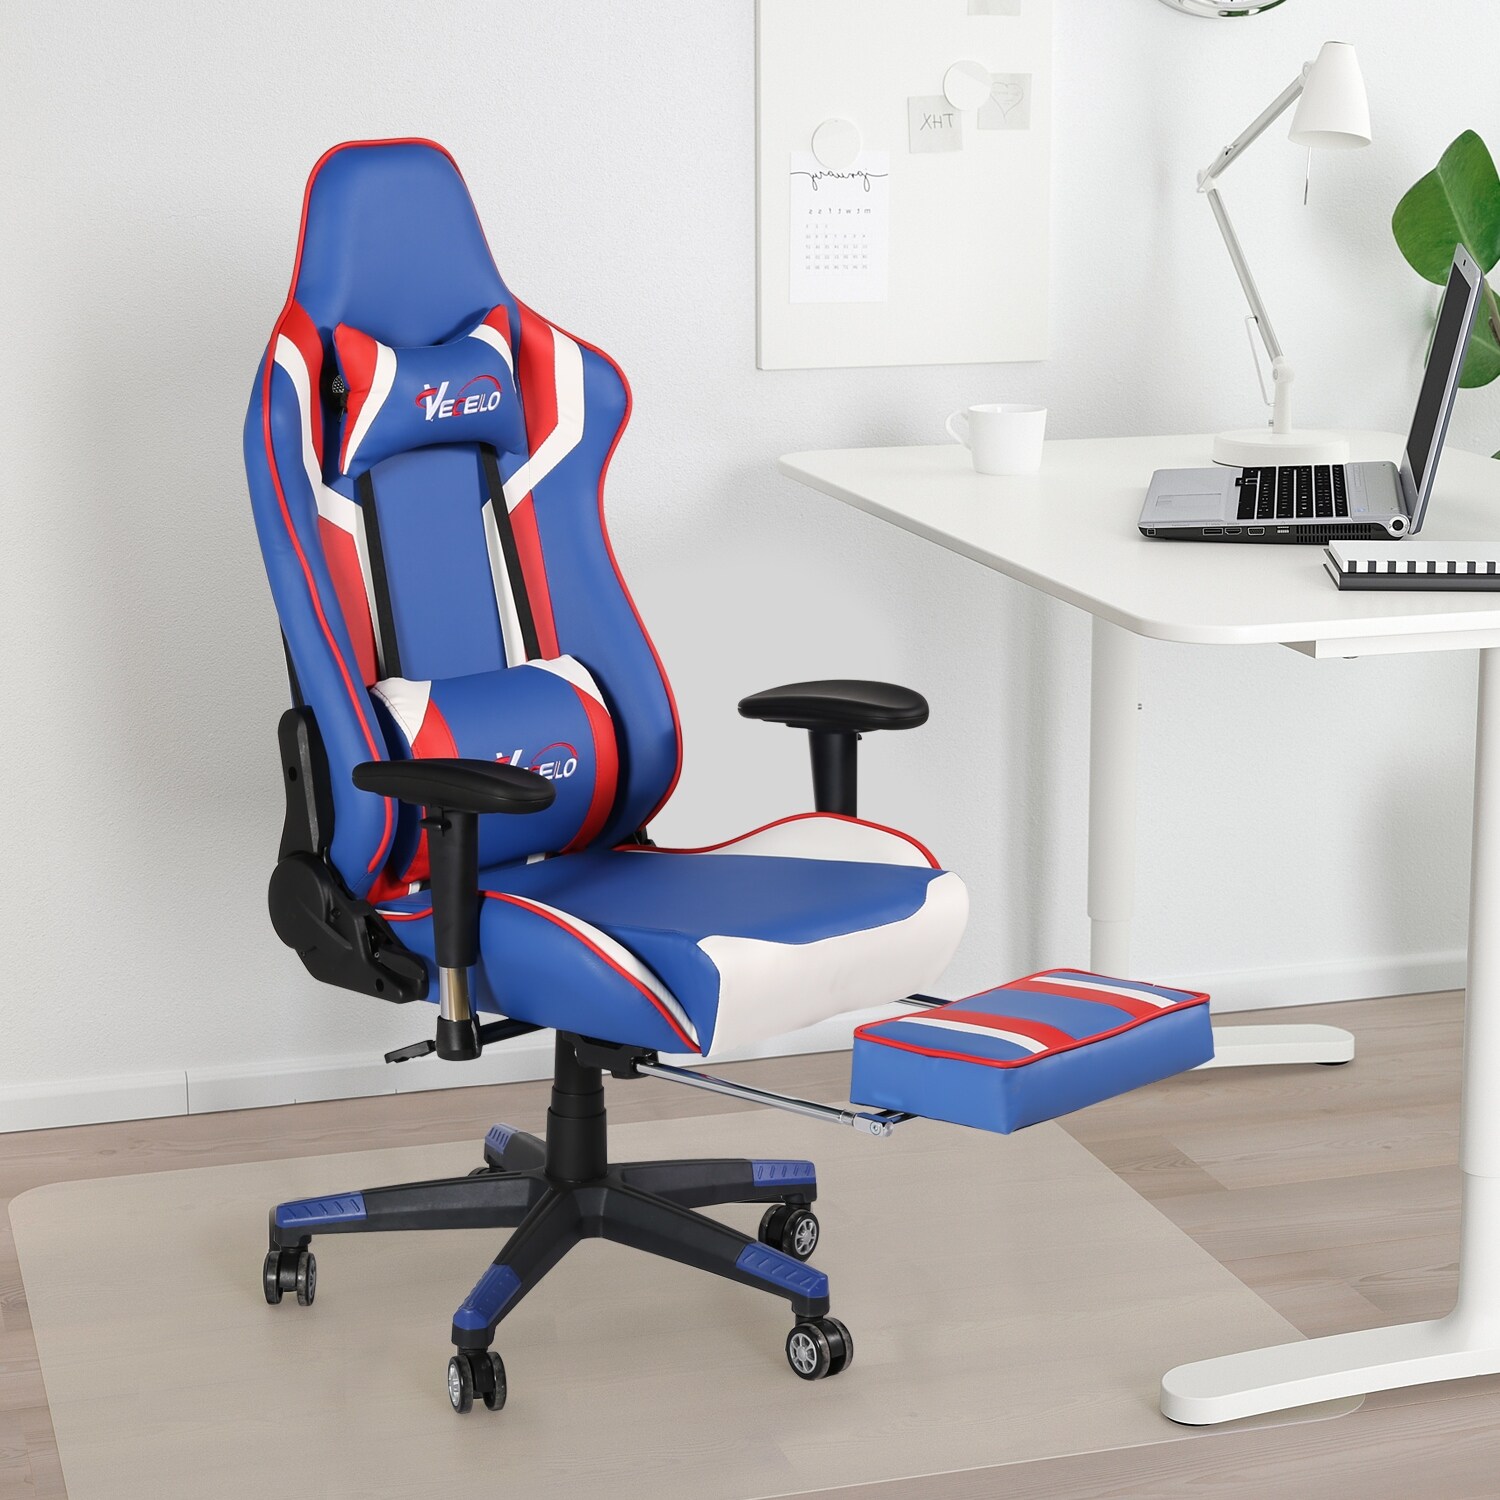 https://ak1.ostkcdn.com/images/products/is/images/direct/a8888d0f12f72726d6653e2bf8dee864e29fad13/VECELO-Gaming-High-Back-Computer-Racing-Ergonomic-Adjustable-Swivel-Chair-with-Footrest.jpg